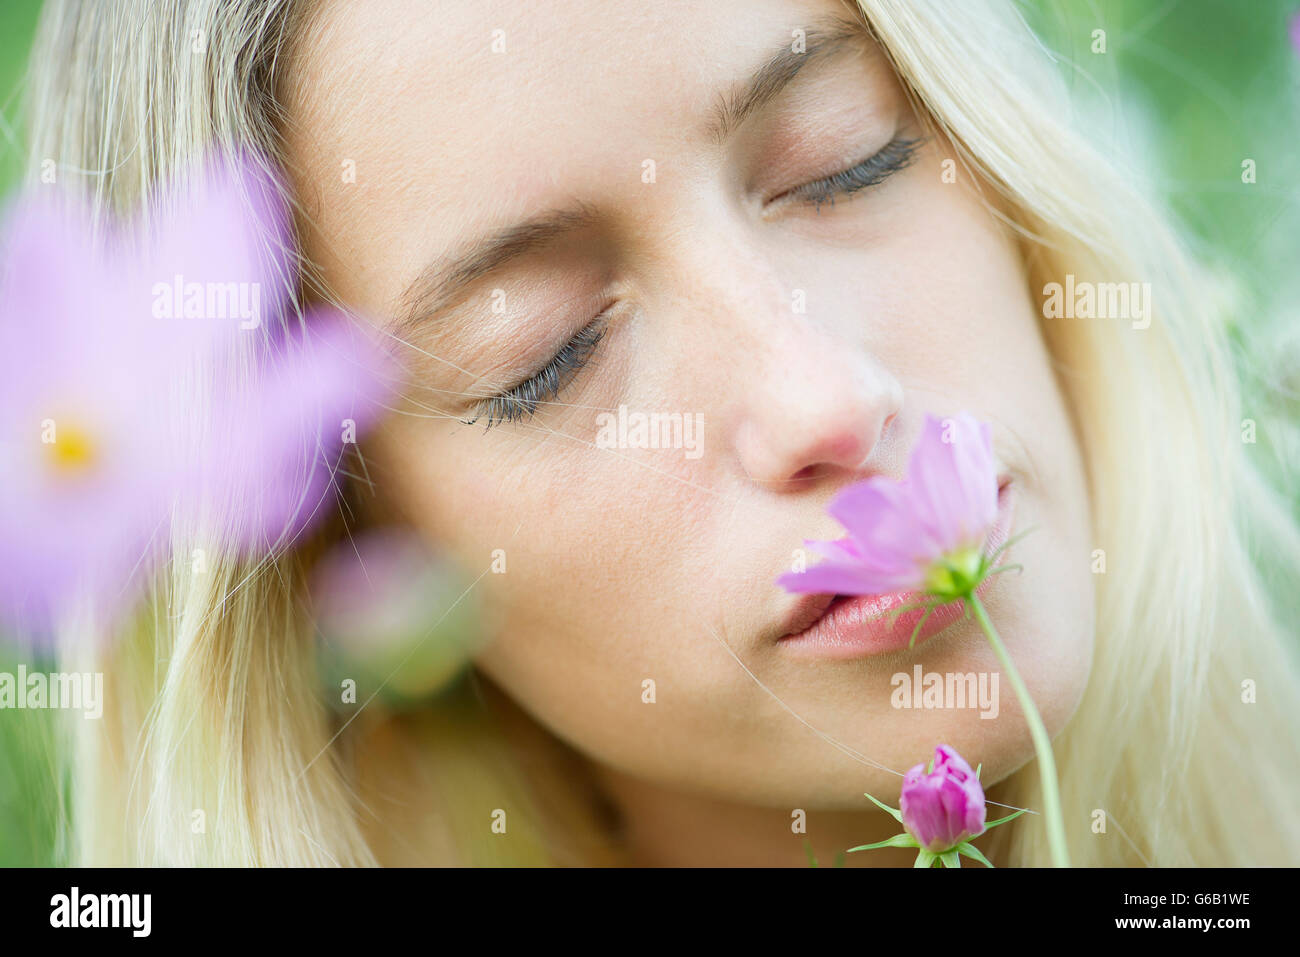 Young woman smelling flowers with eyes closed, portrait Stock Photo